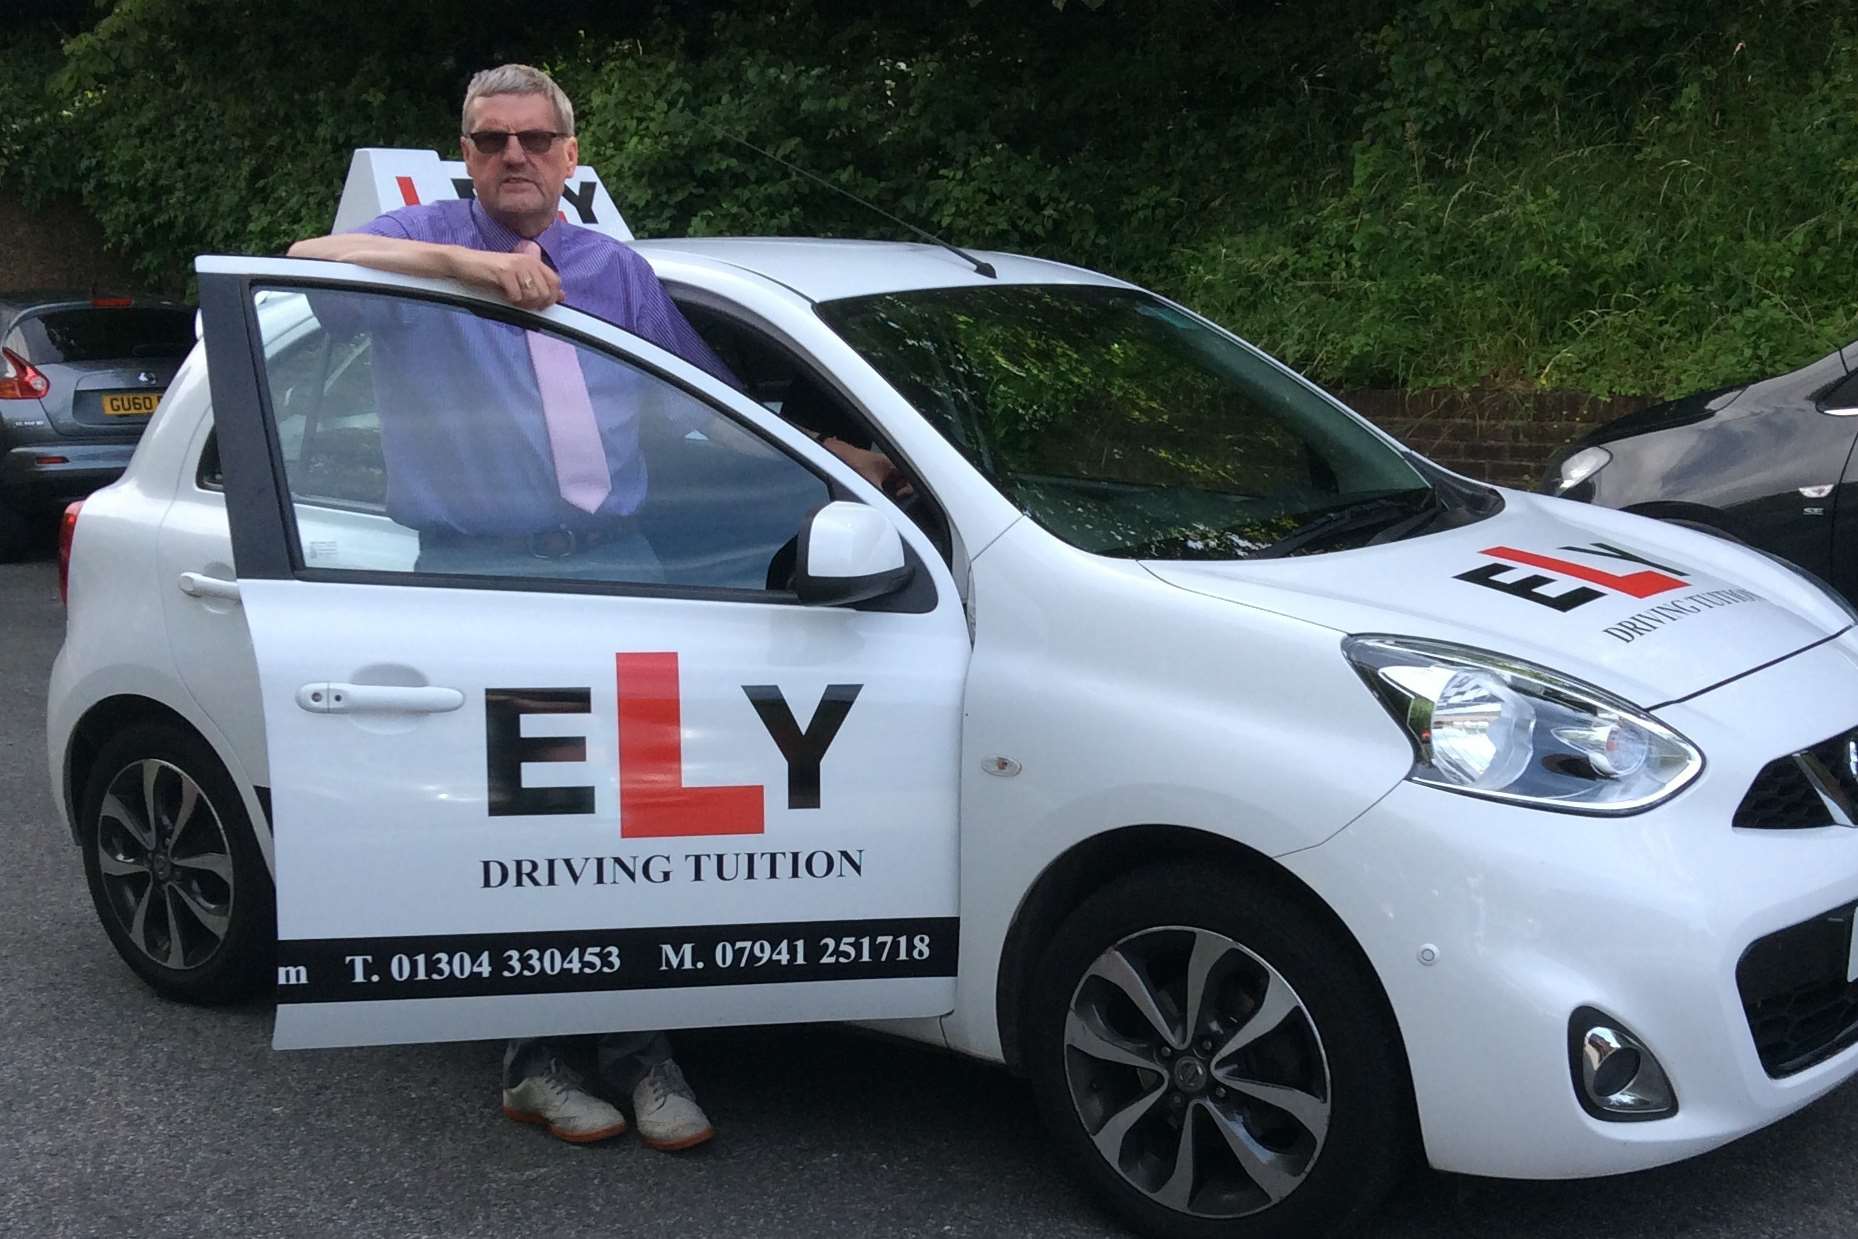 Driving instructor Malcolm Ely with the car attacked by yobs.